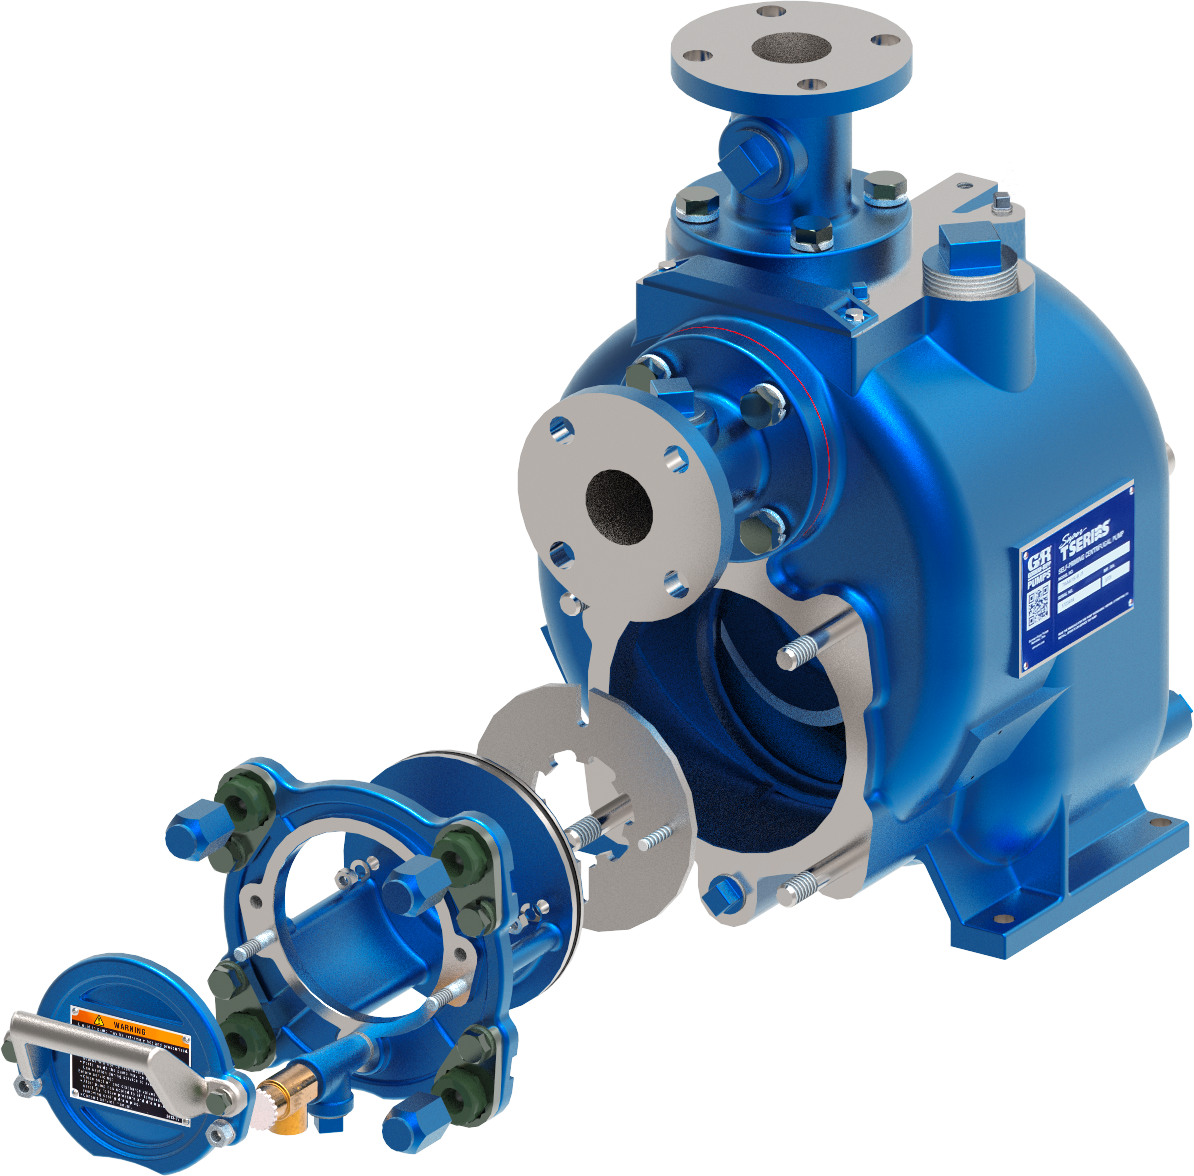 Introducing the 2″ Super T Series® Pumps